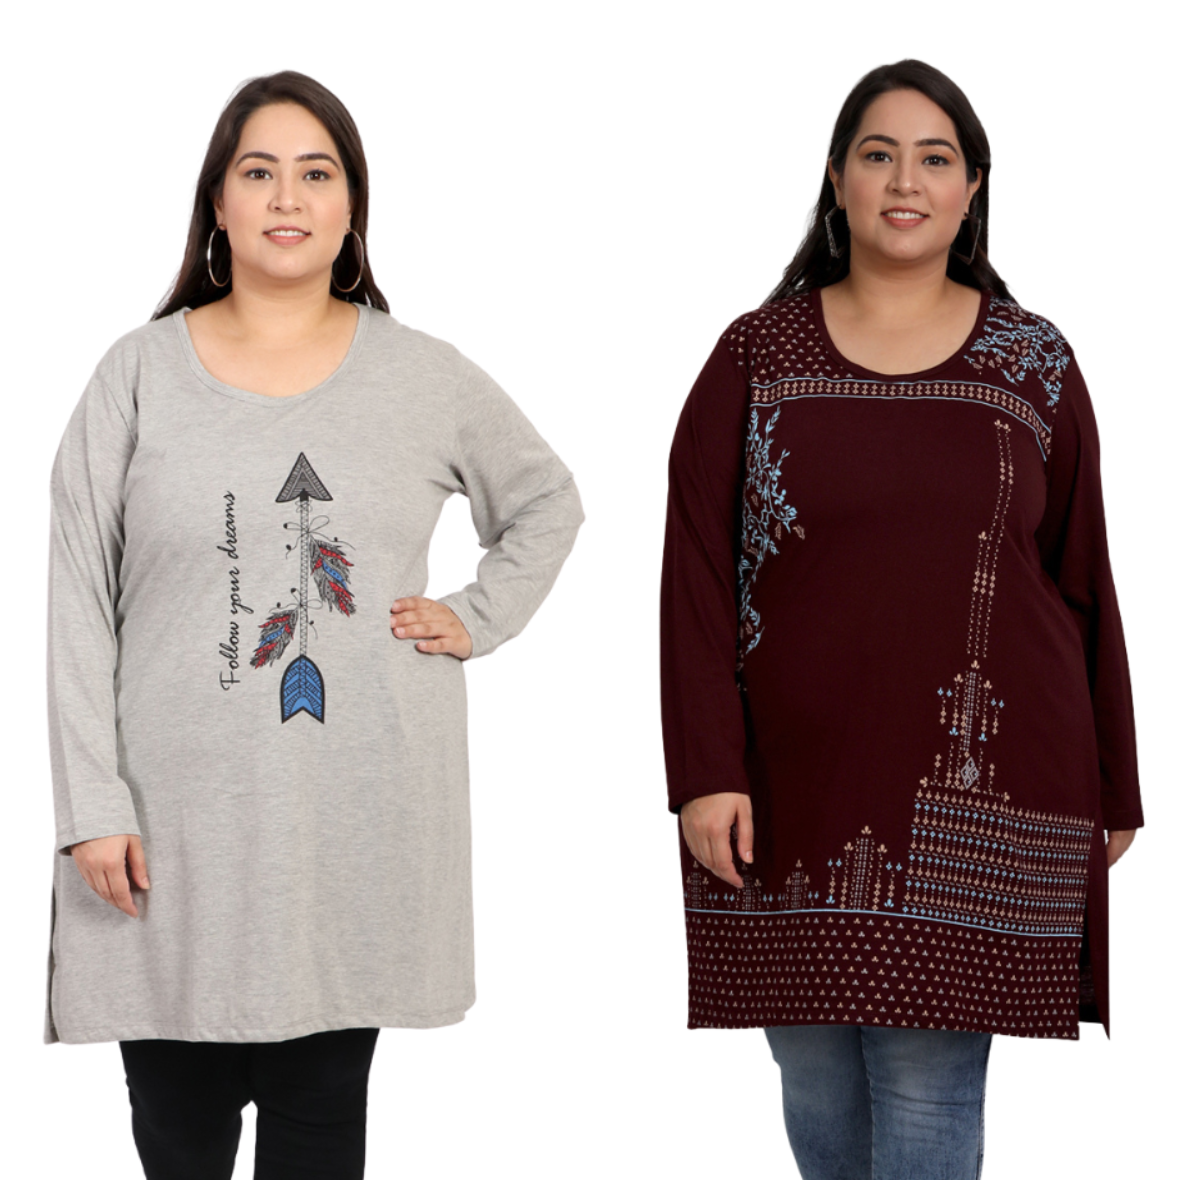 Plus Size Cotton Long Tops for Women Full Sleeves - Pack of 2 (Wine & Grey)